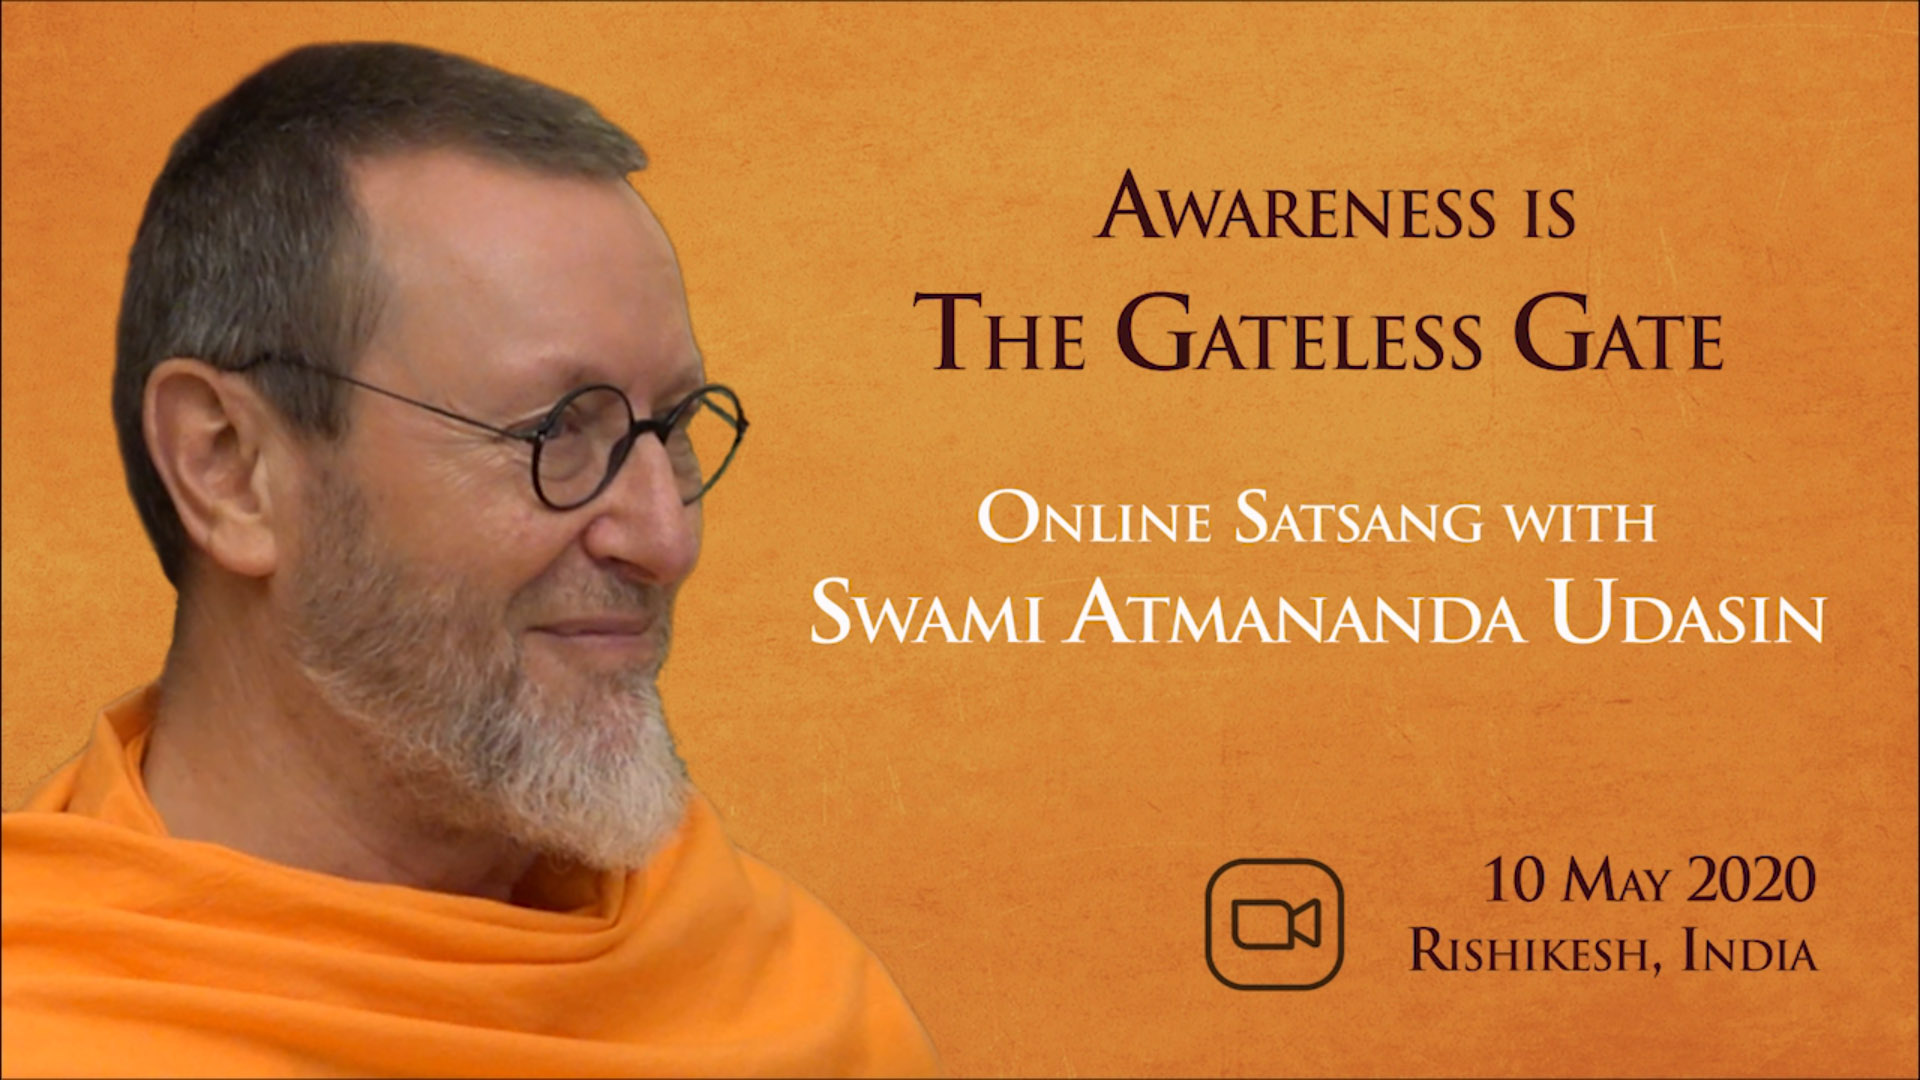 Awareness is the Gateless Gate